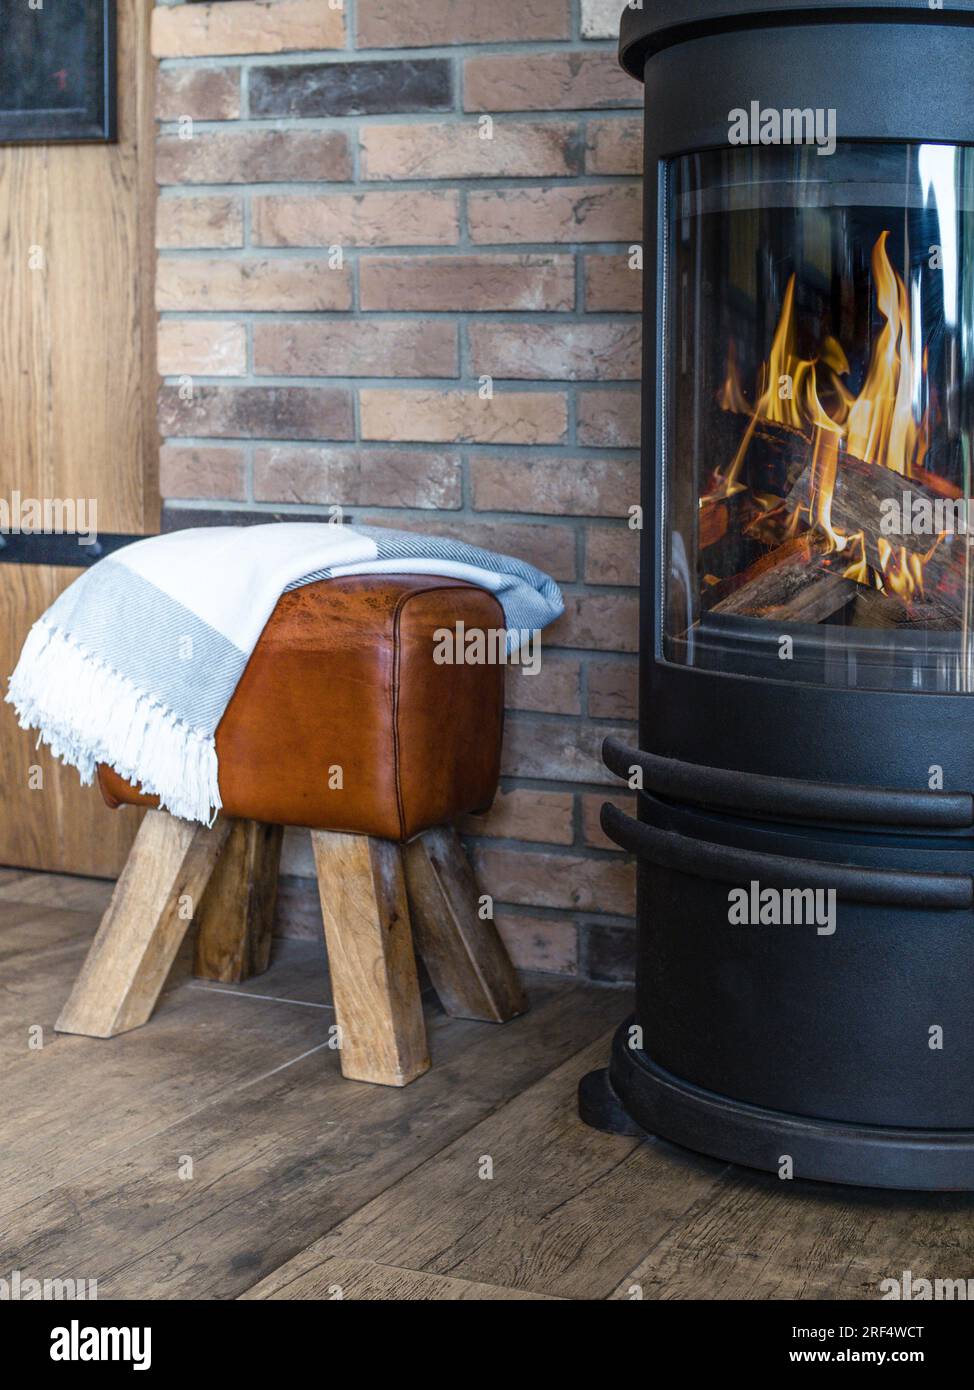 Cosy metal stove fireplace with burning flame behind a glass door and leather stool. Stock Photo